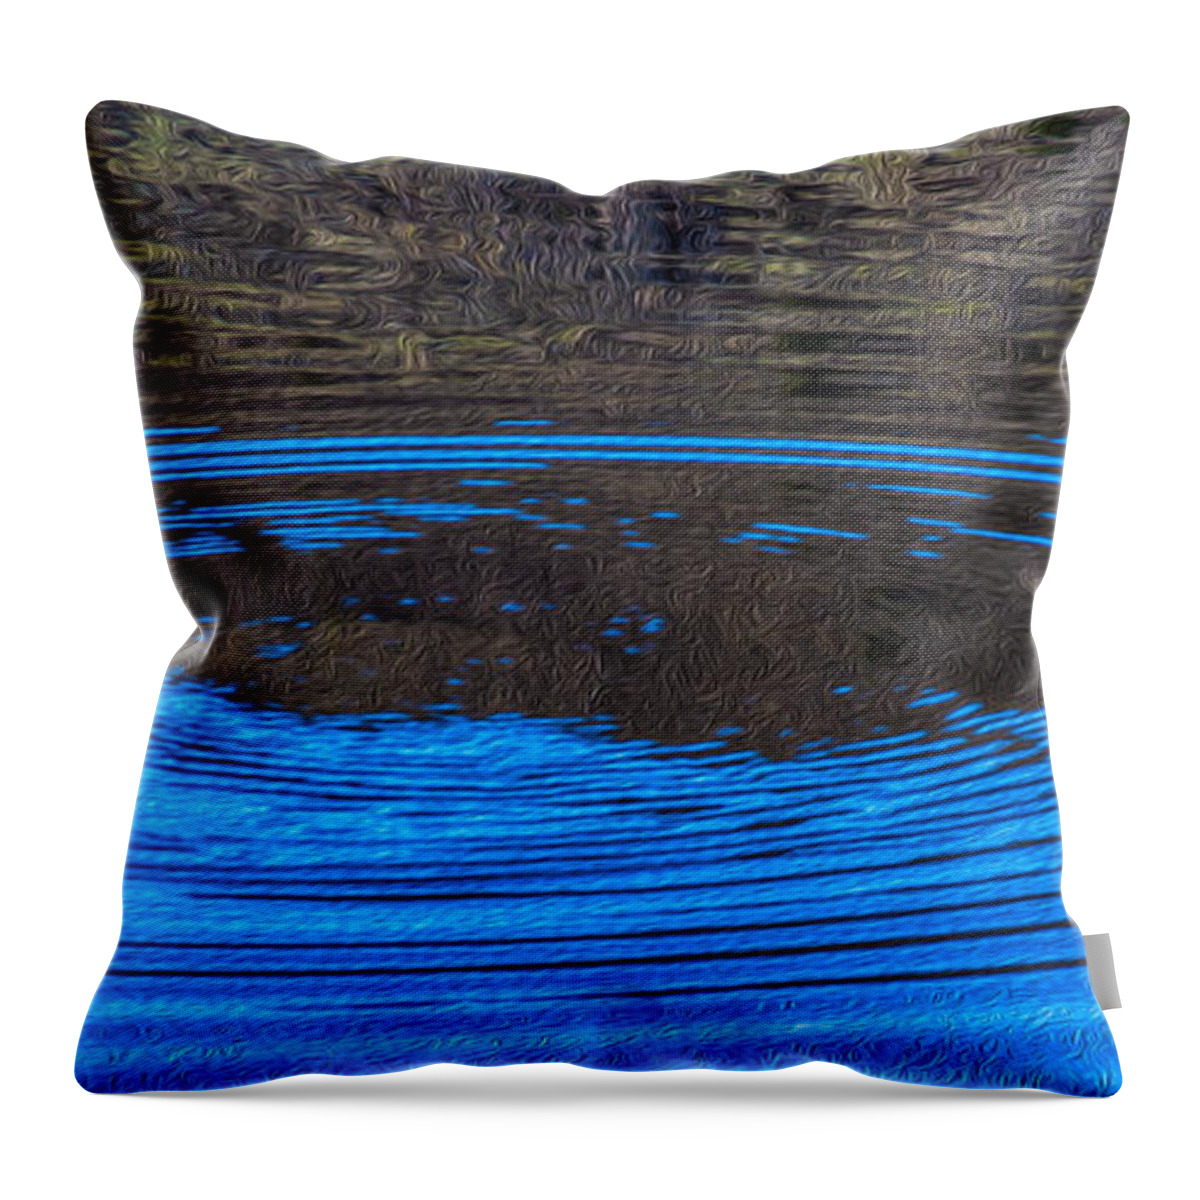 Ripple Throw Pillow featuring the painting Handy Ripples by Omaste Witkowski